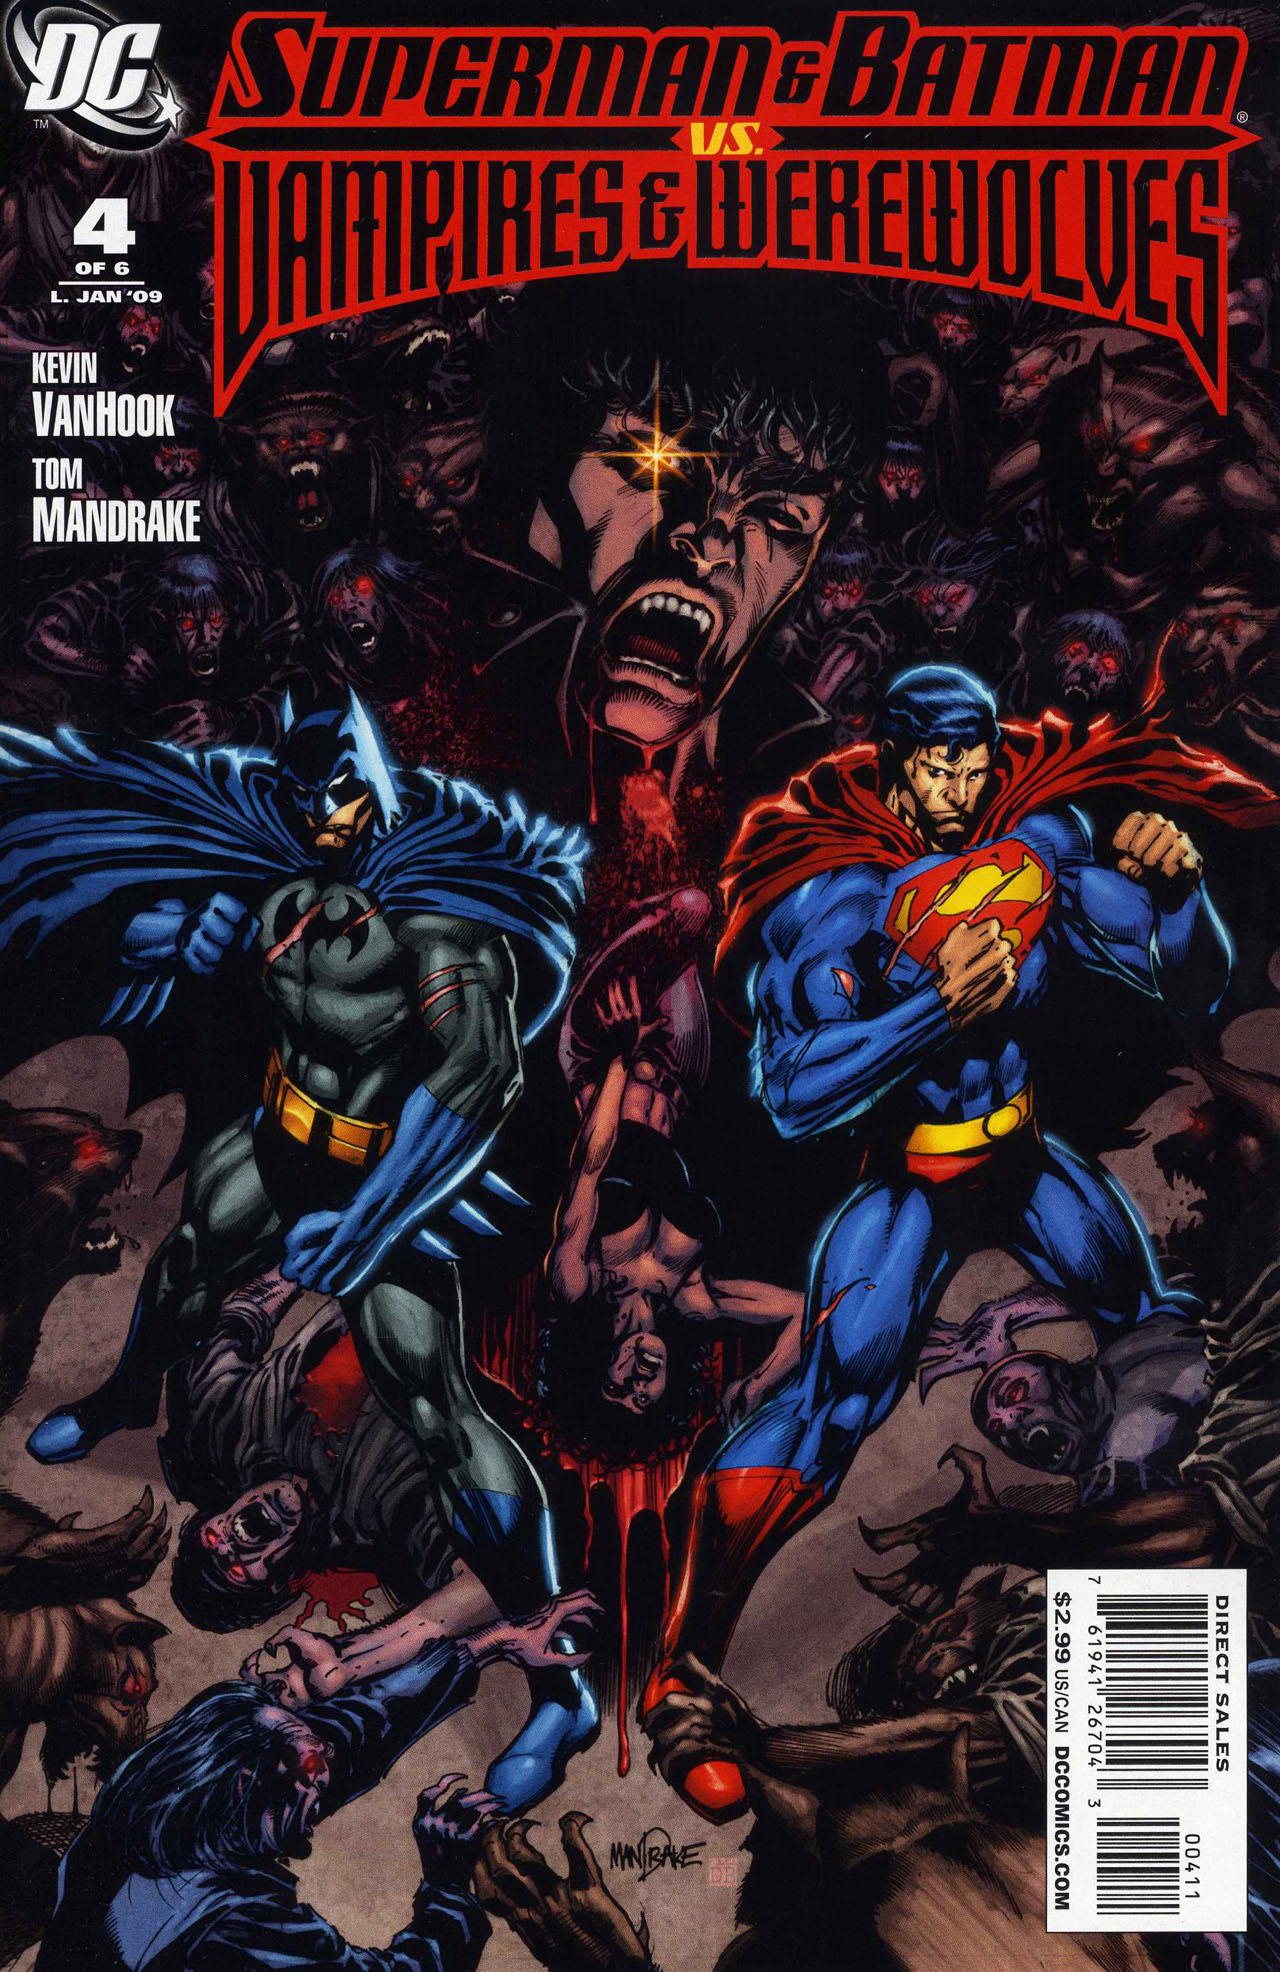 Read online Superman and Batman vs. Vampires and Werewolves comic -  Issue #4 - 1